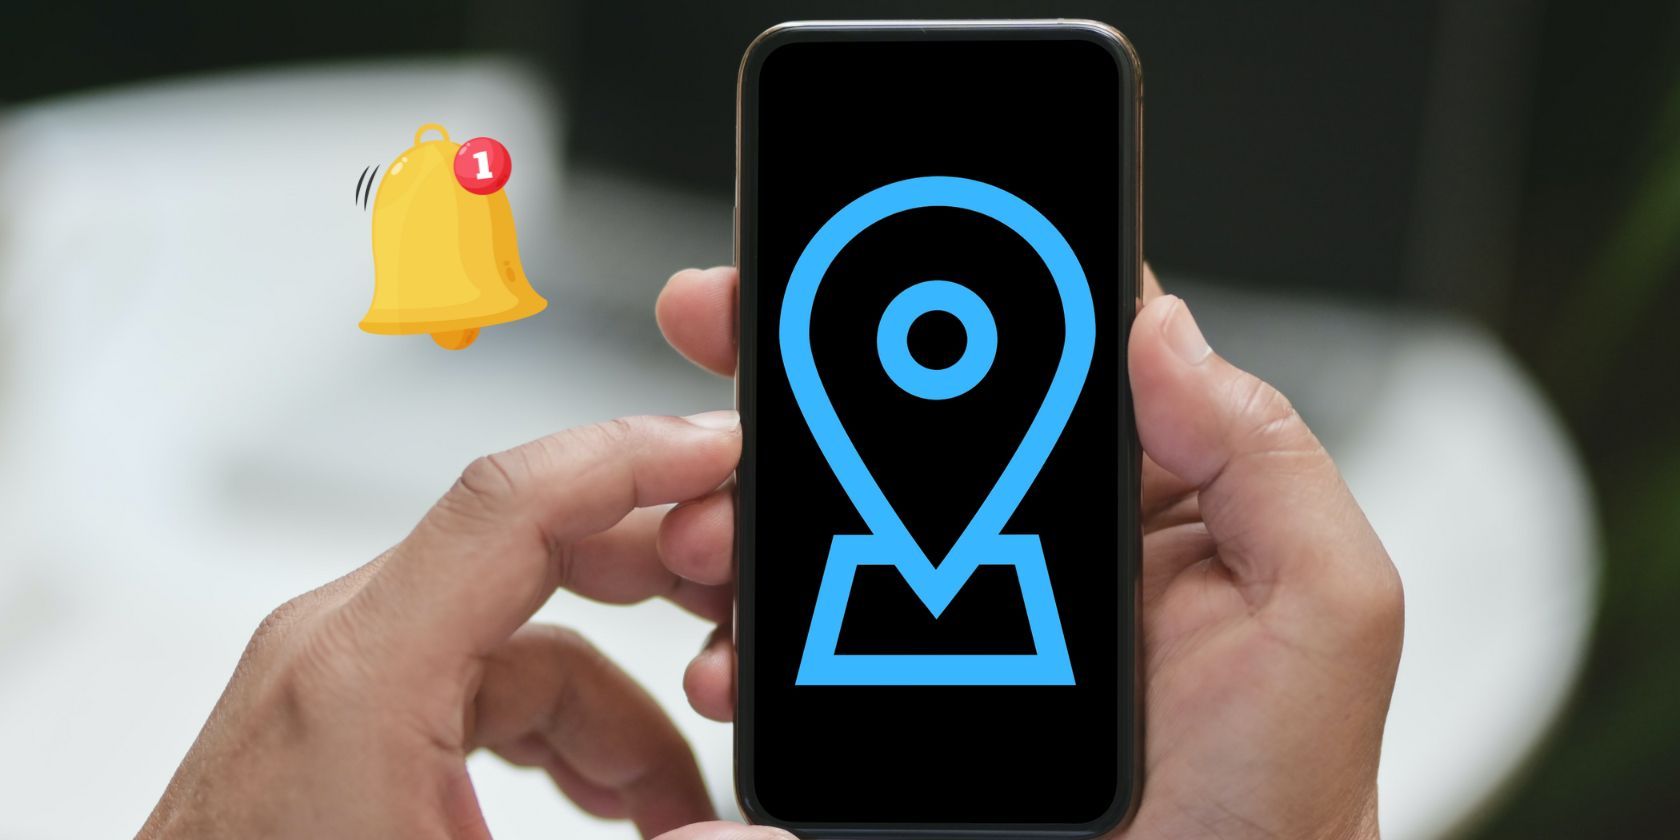 location based reminder apps feature image